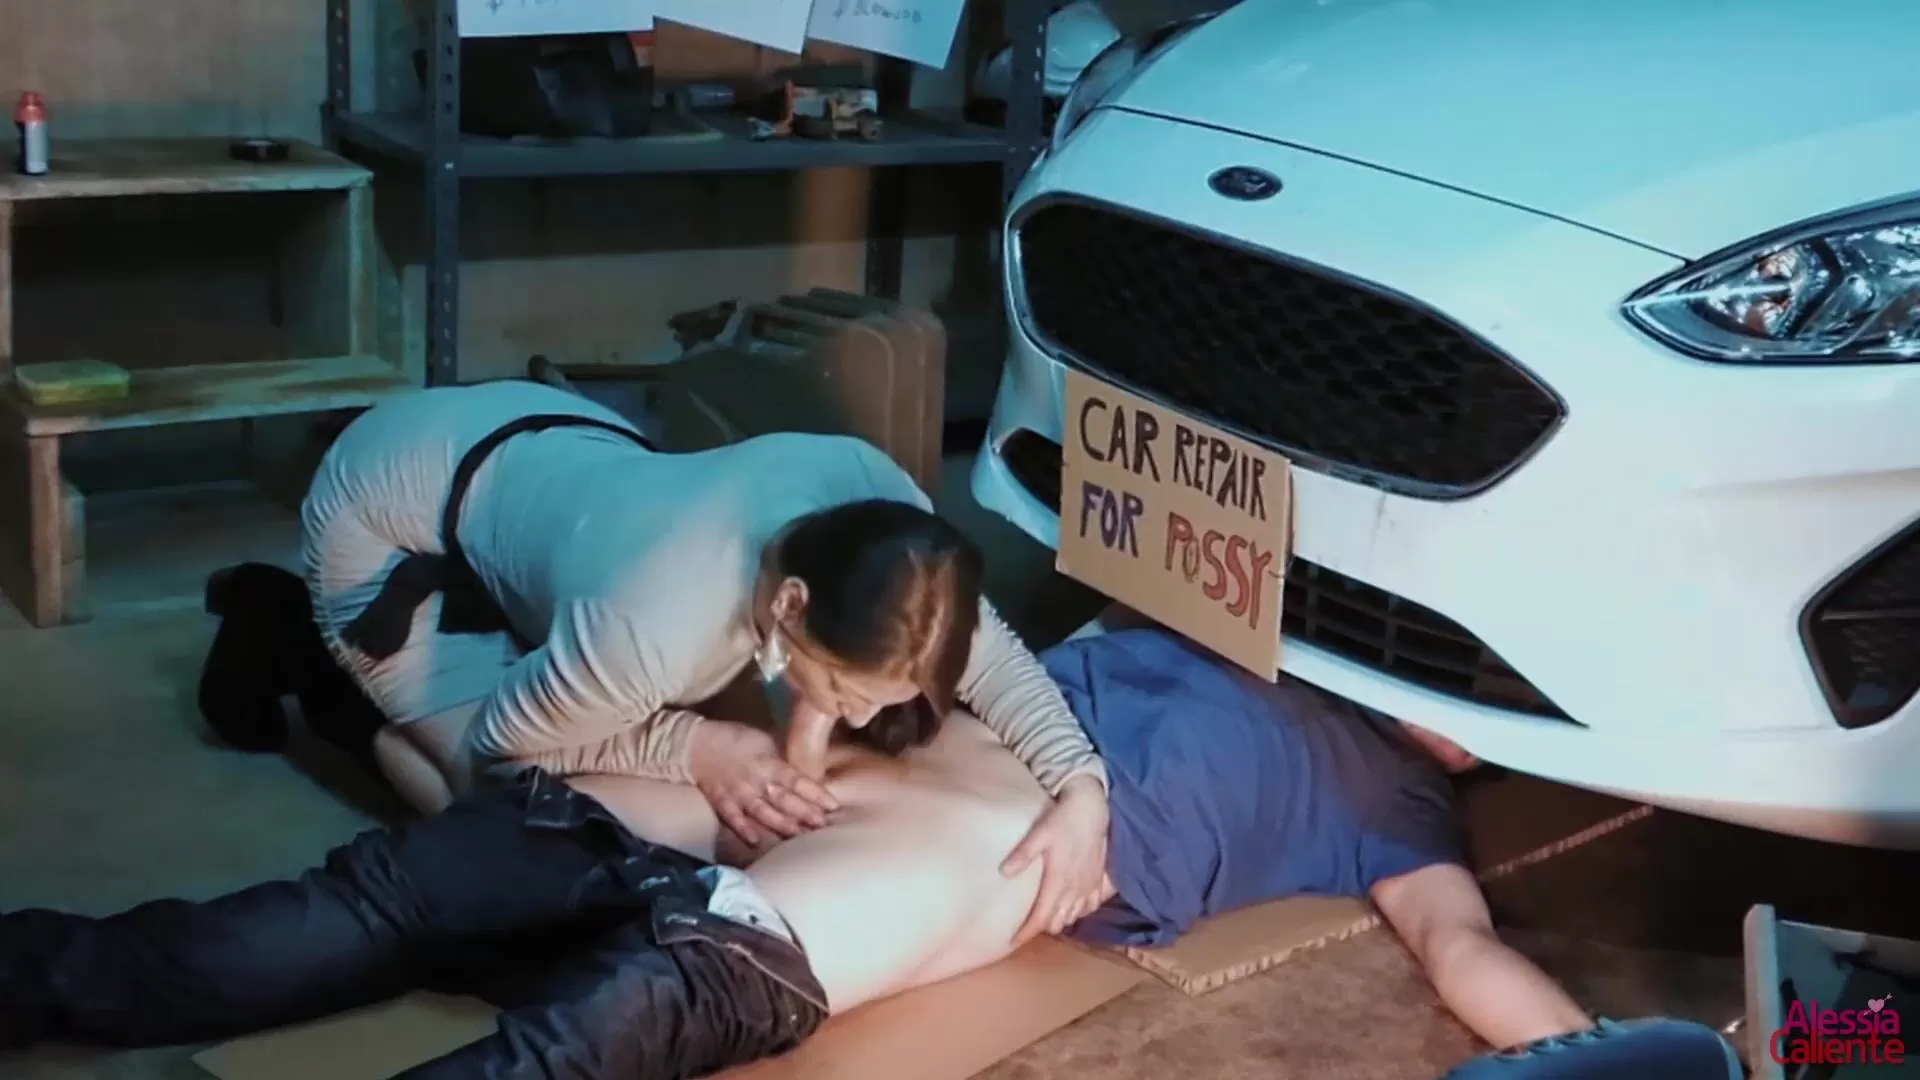 Slutty Customer Bangs Her Mechanic - Car Repair for Pussy picture image